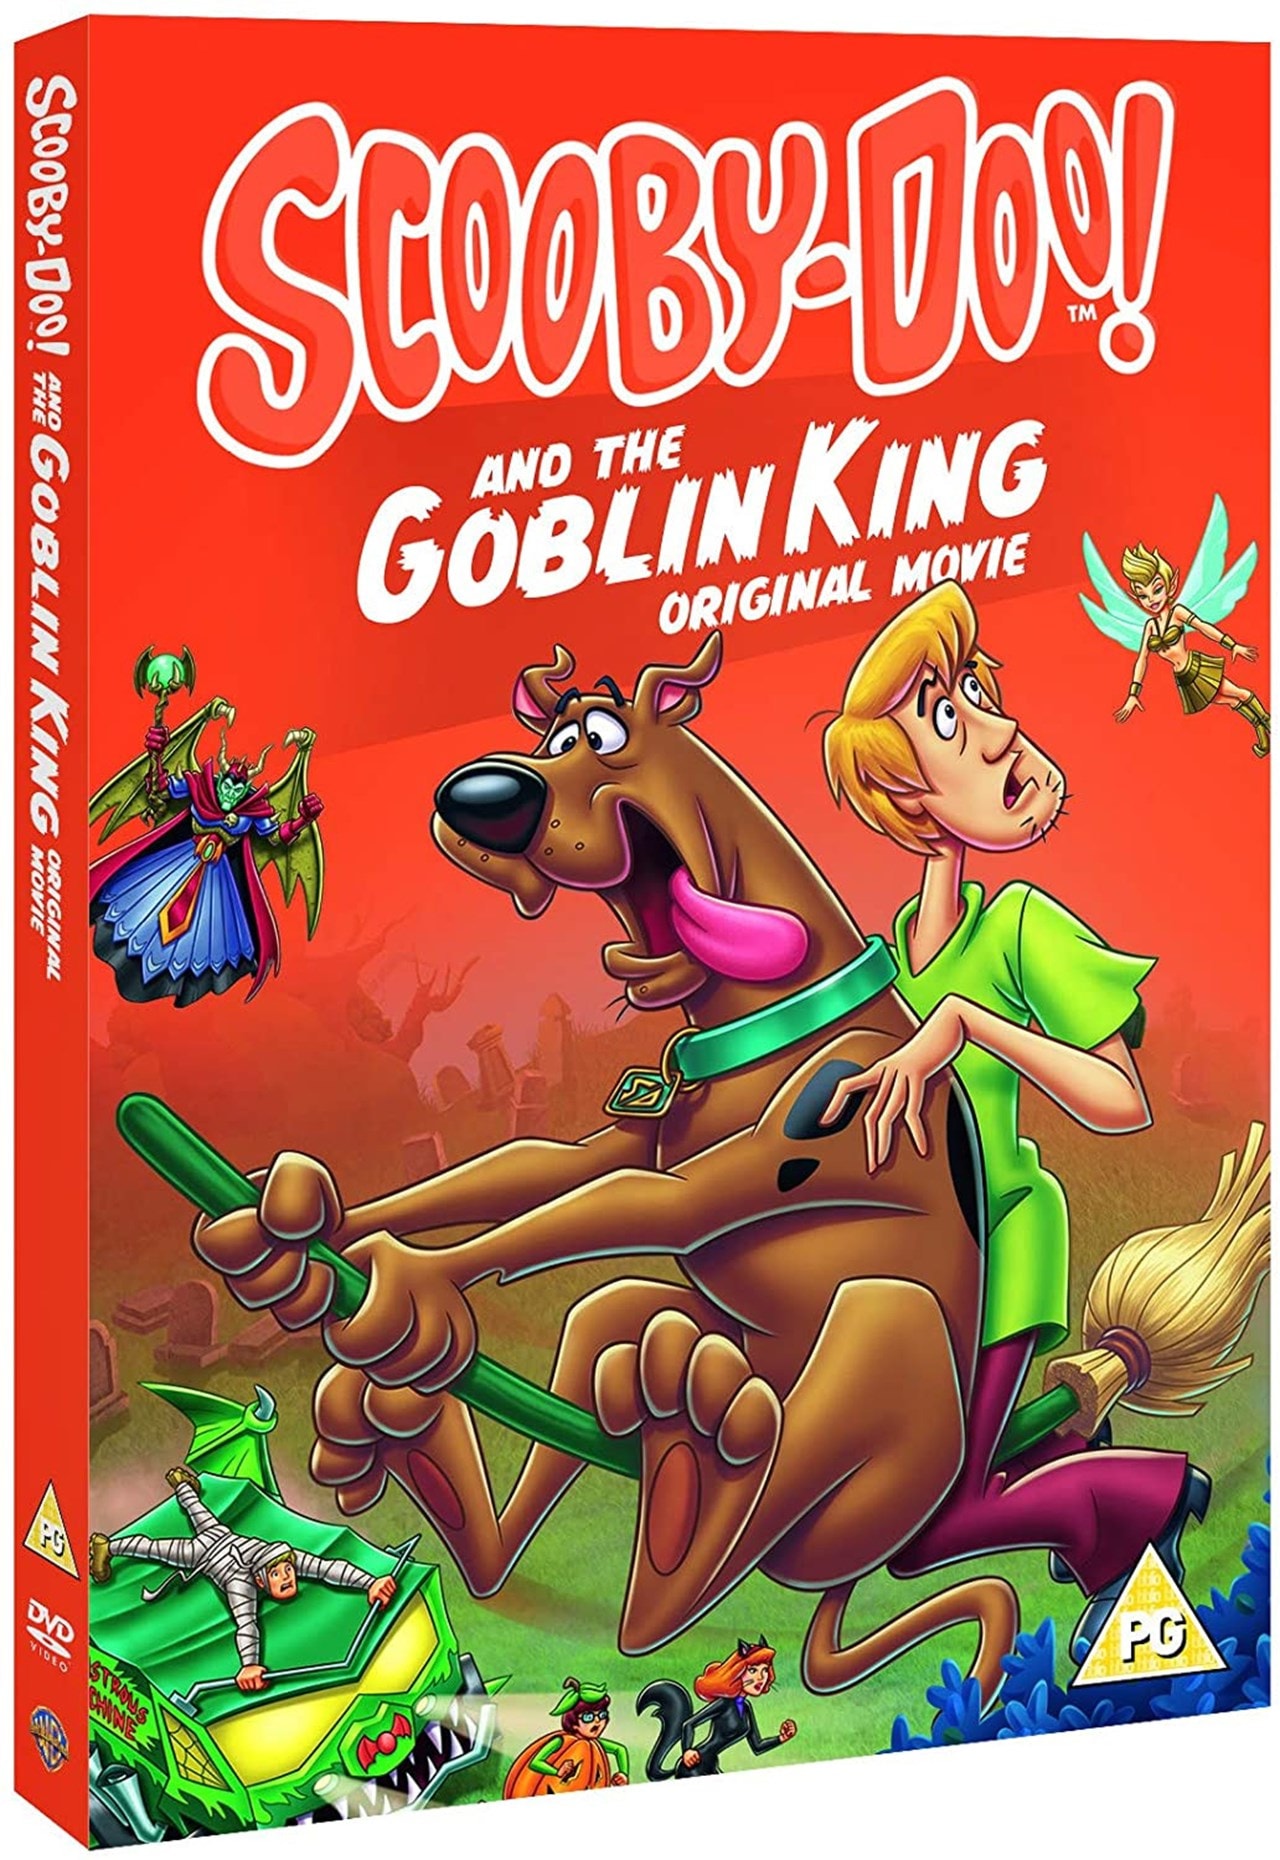 Scooby-Doo: Scooby-Doo and the Goblin King | DVD | Free shipping over £